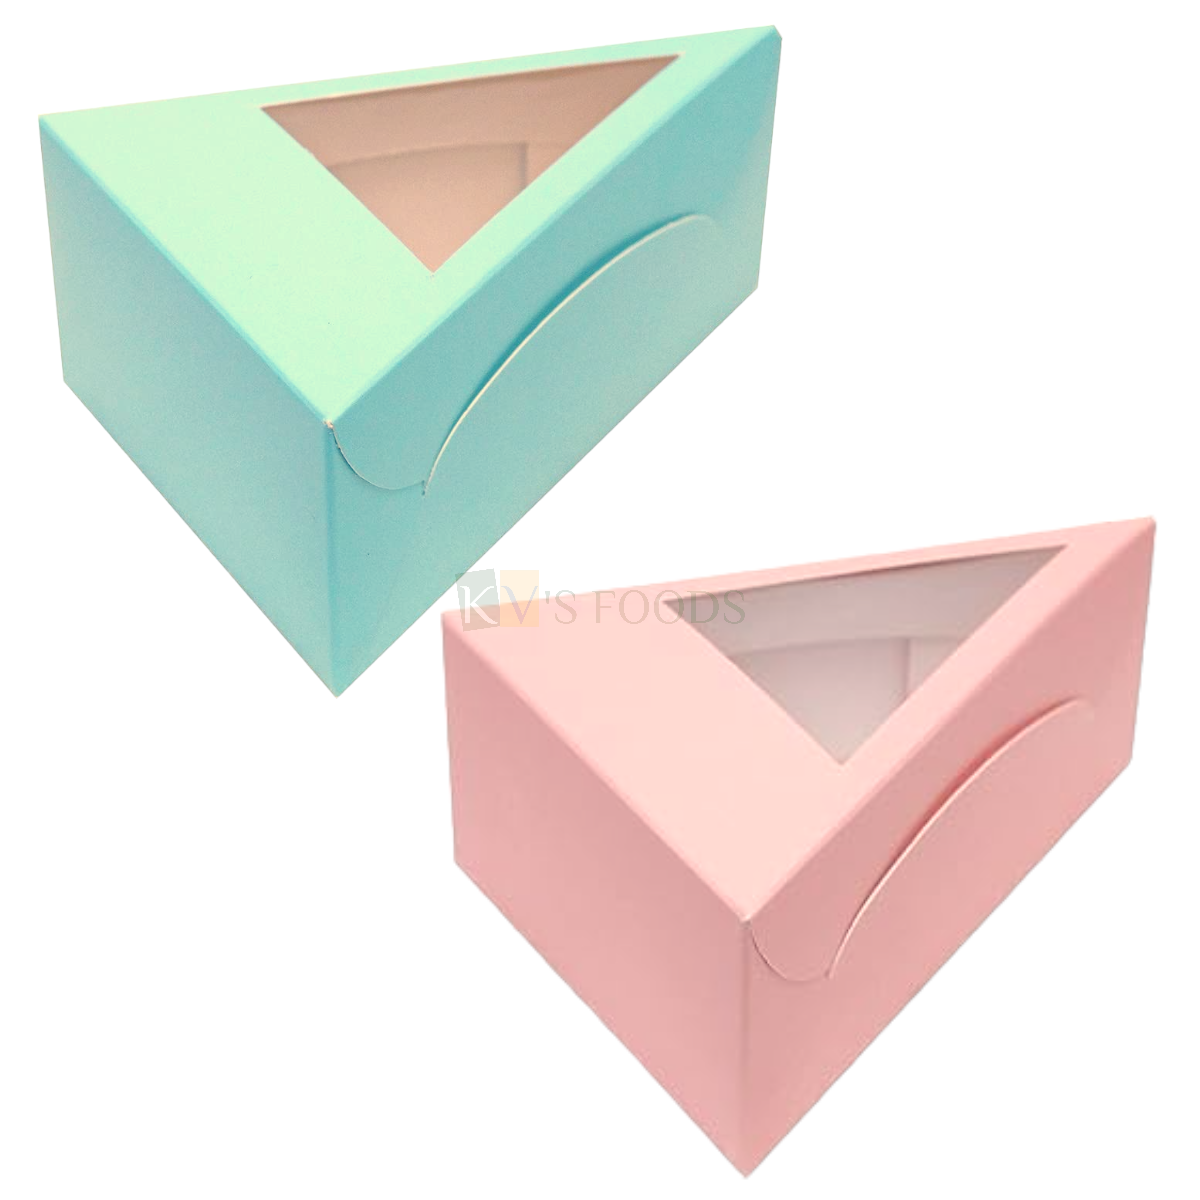 5PC Set of Multipurpose Pastel Colour 1 Pastry Triangle Box With Transparent Window Box Size 5.5 X 4.0 X 2.5 Inch for Chocolates, Cookies, Truffles, Cake Slice Box Cheese slice Hamper Folding Boxes